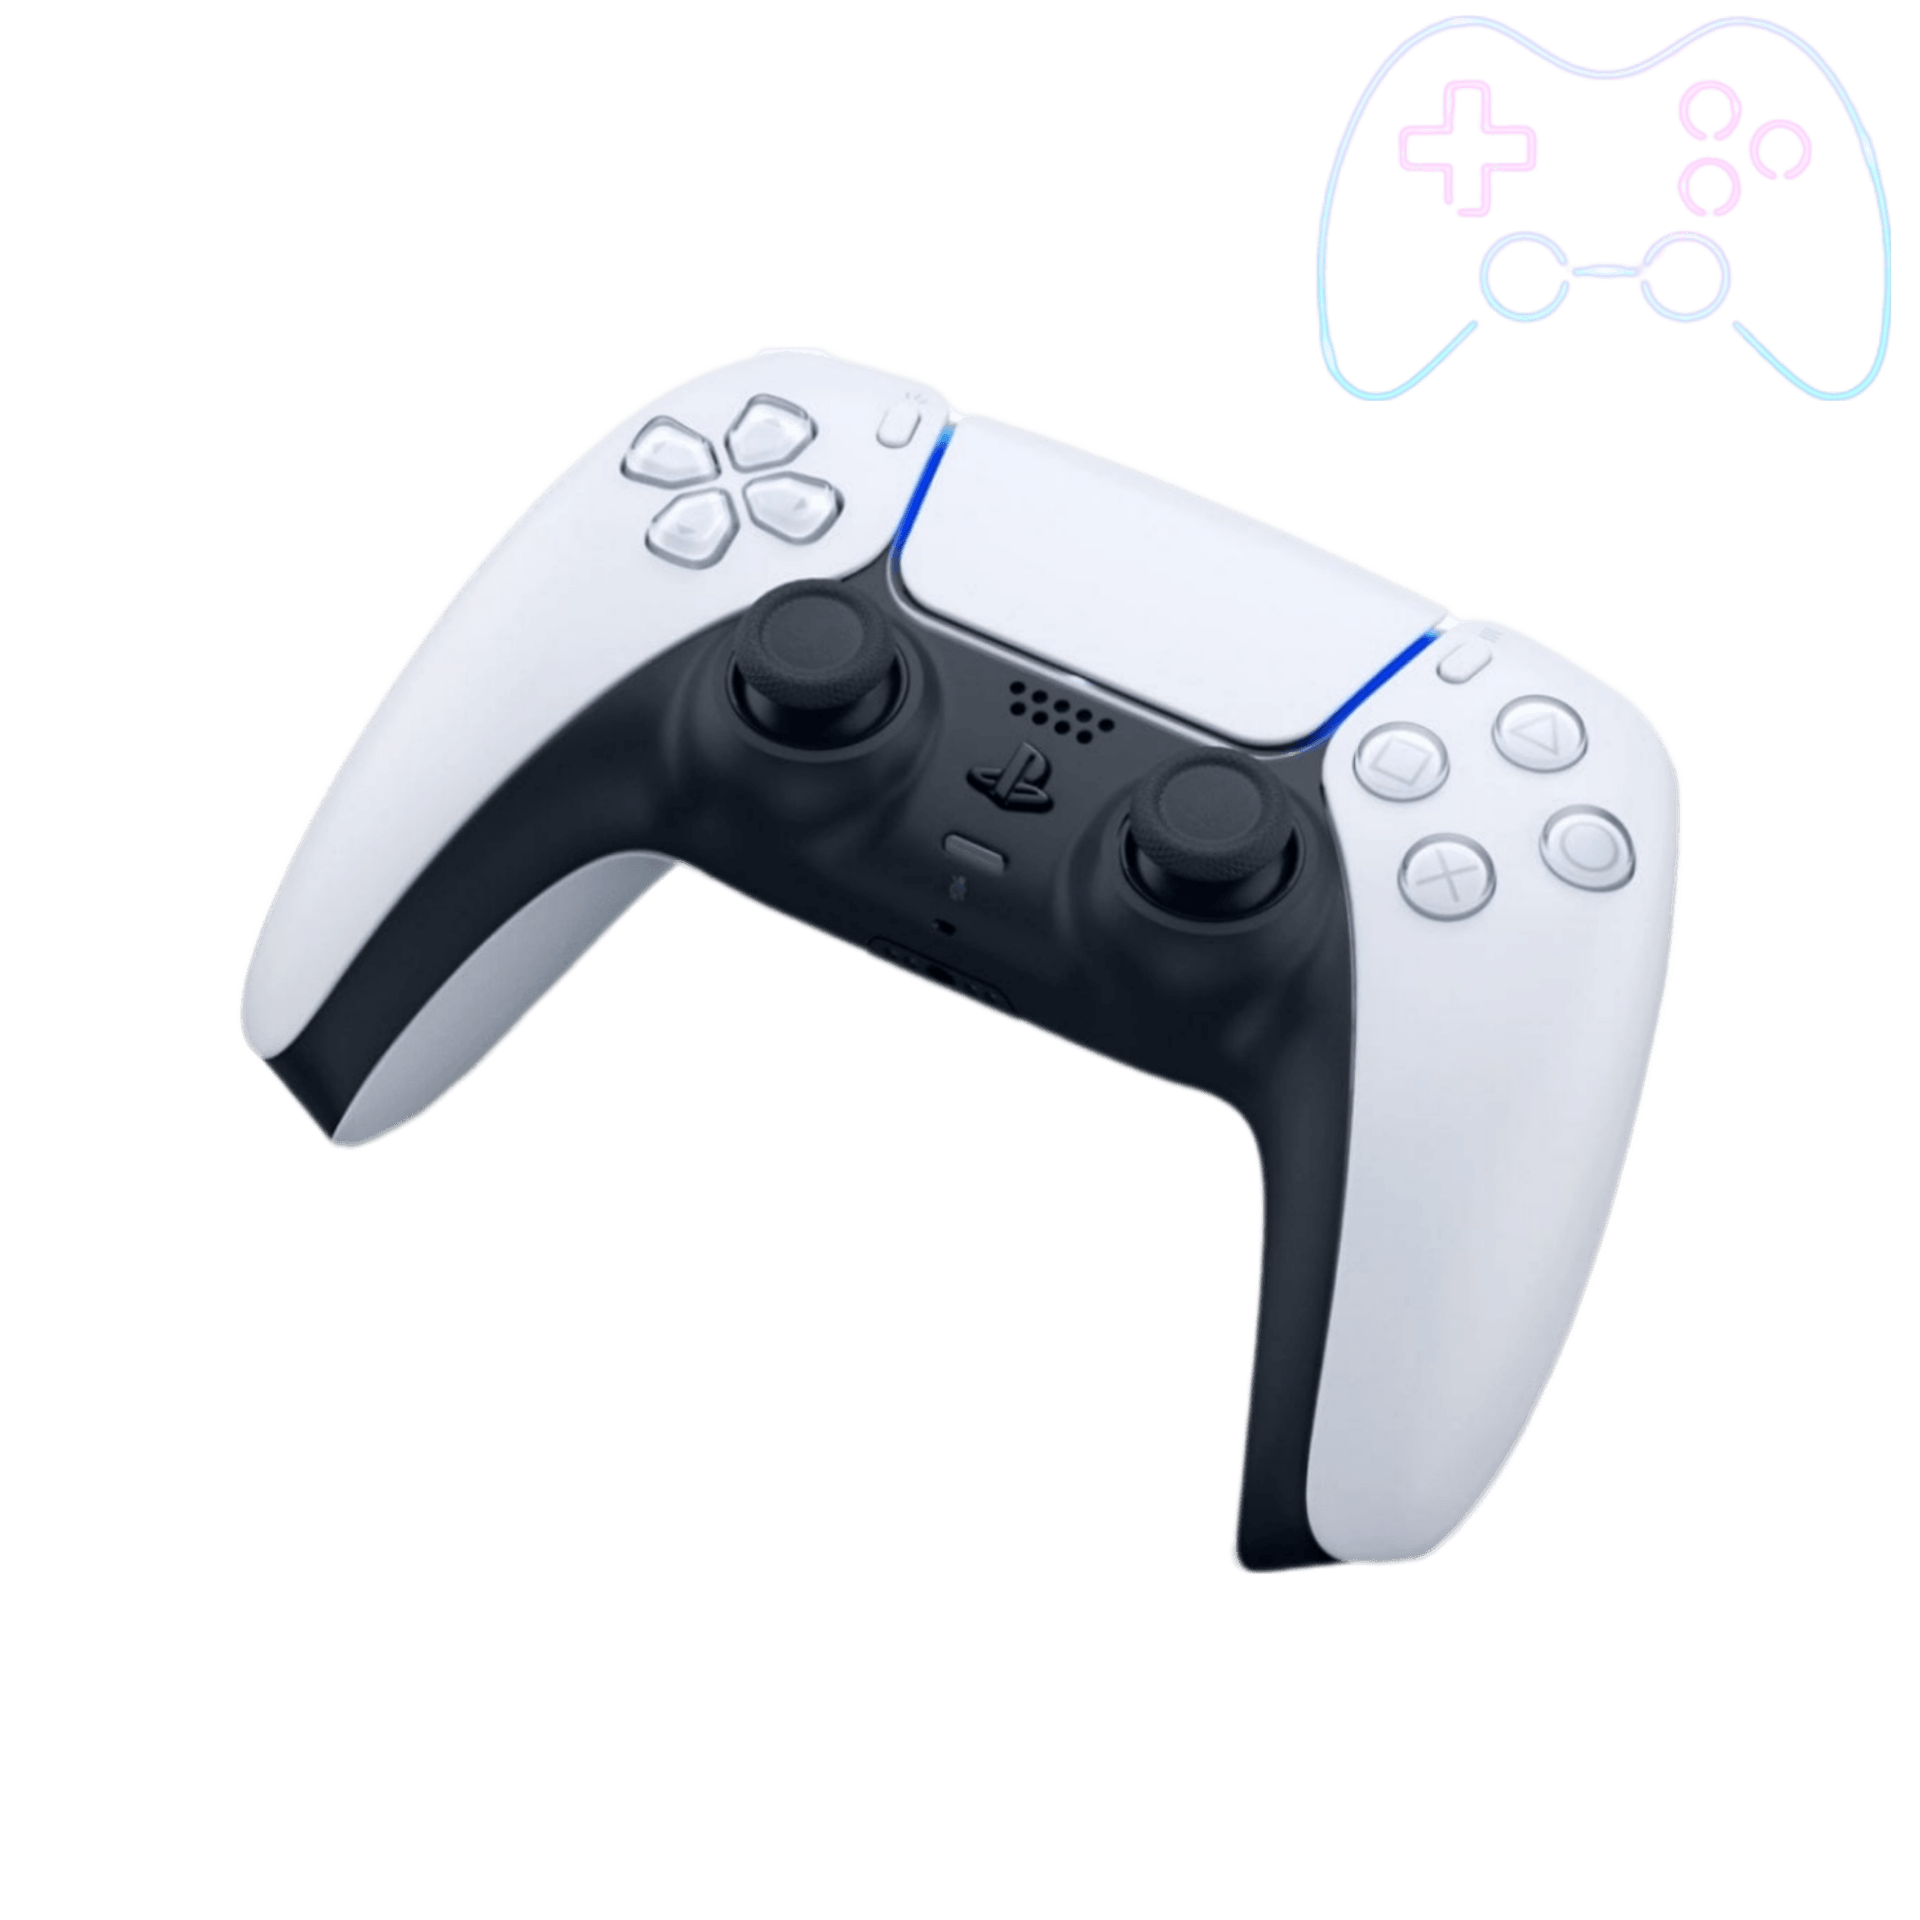 PS5 Controller – Musically Gamed